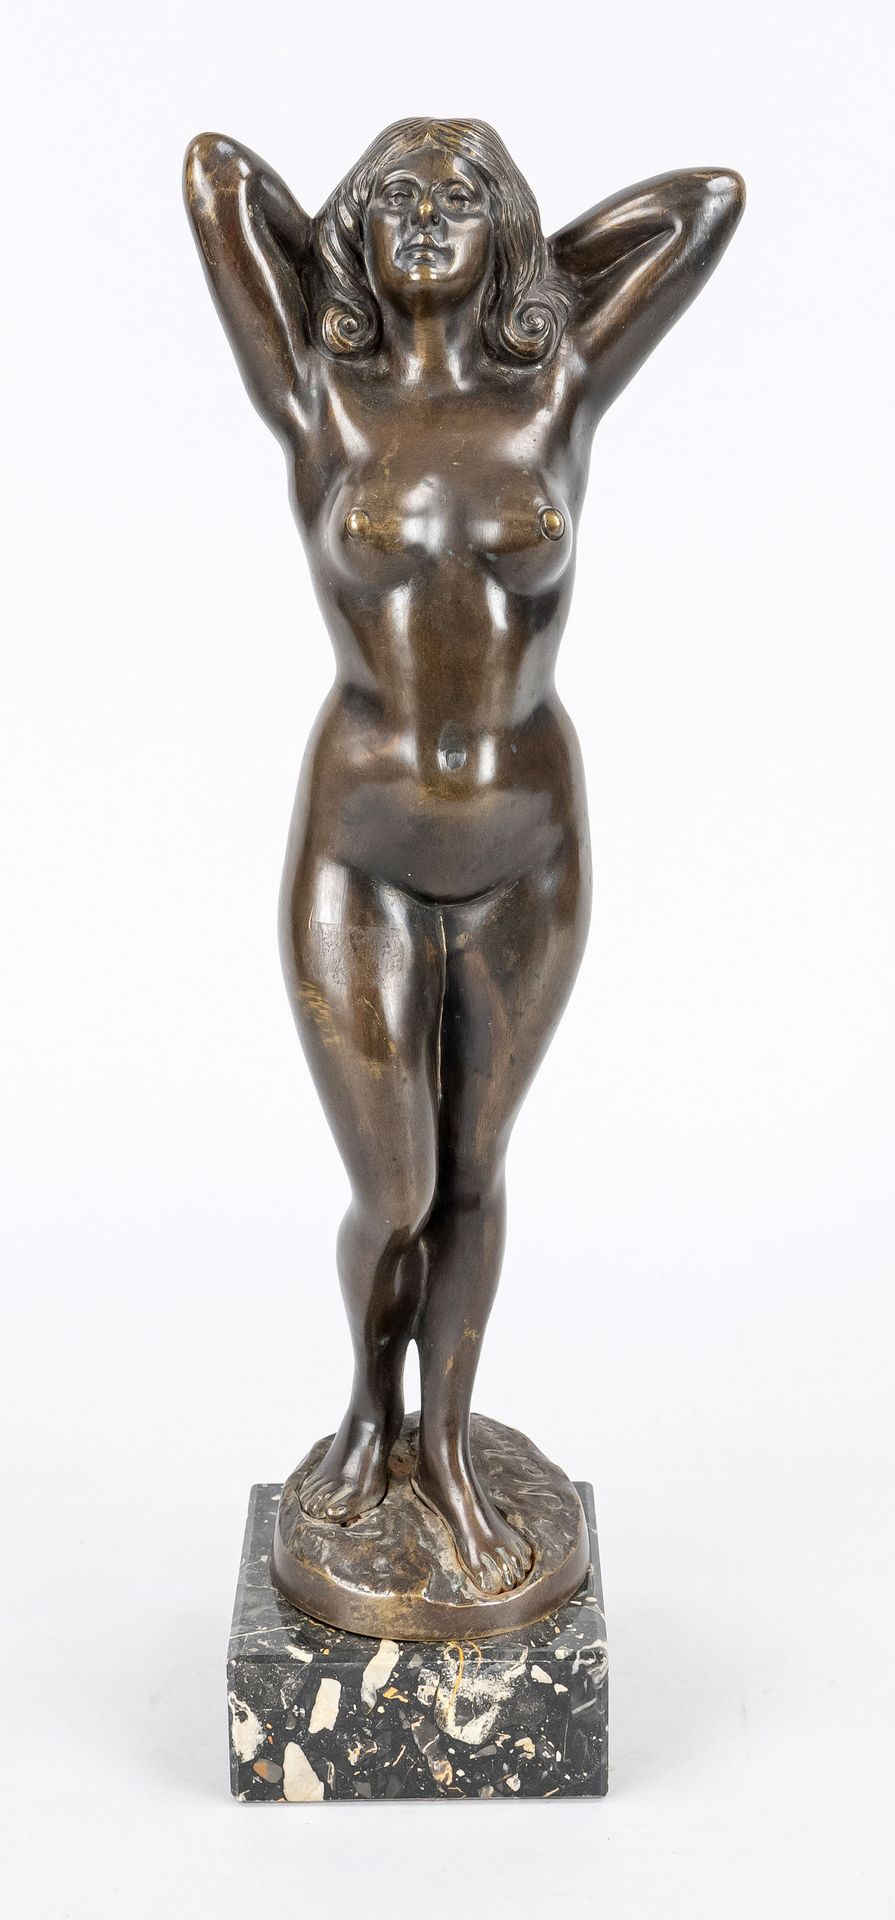 Null signed Mahusz, sculptor c. 1920, standing female nude, patinated bronze ove&hellip;